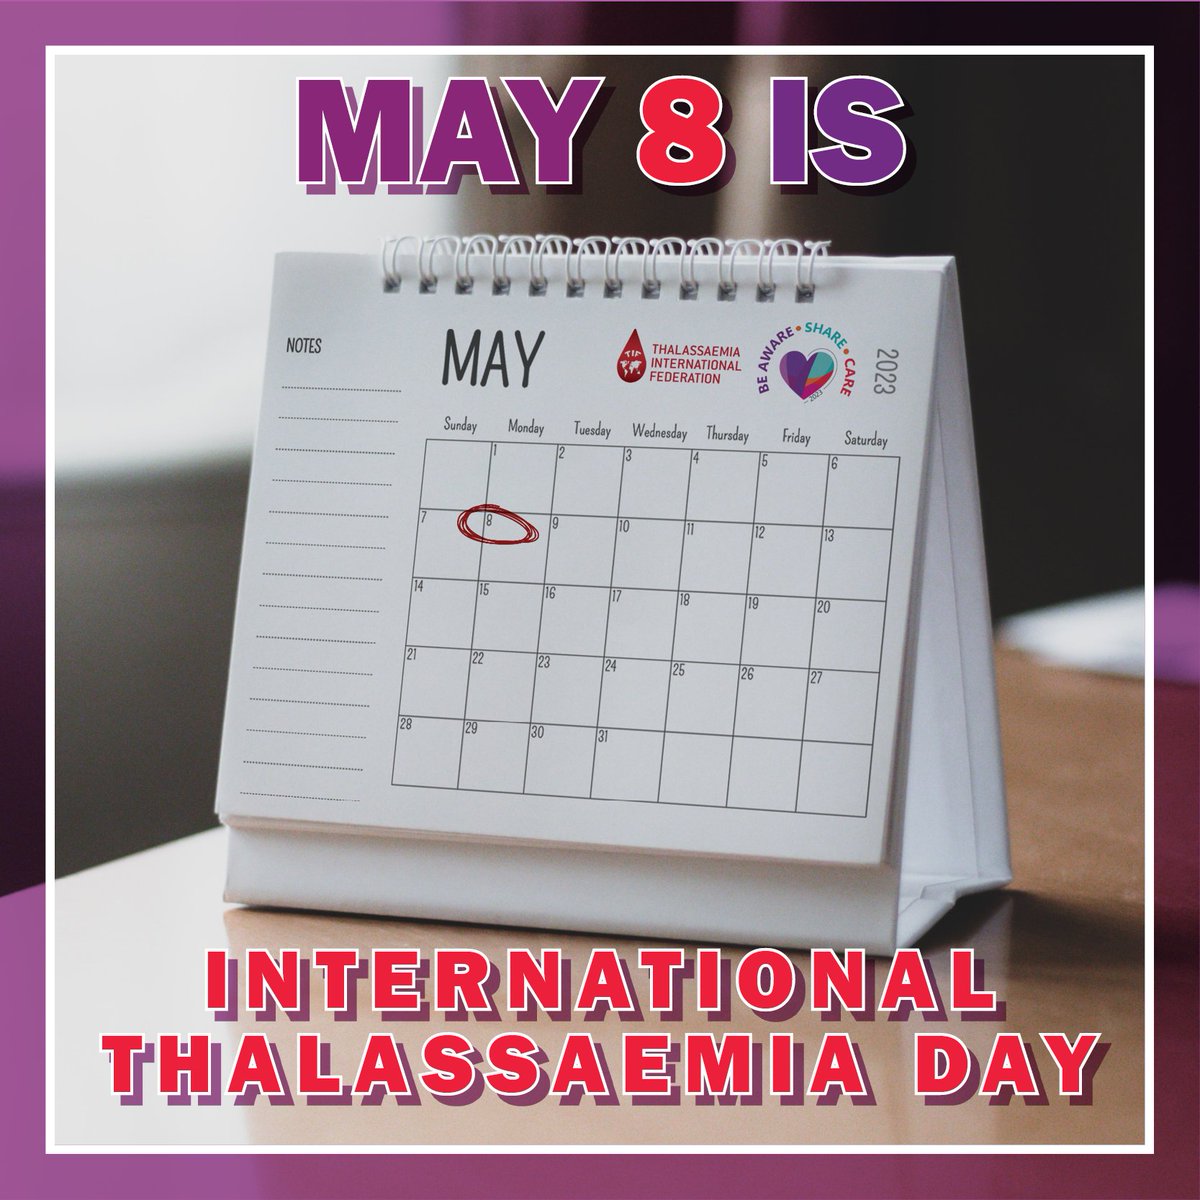 8 May is International Thalassaemia Day ‼️ #ITD2023 Speak up, stand up and #BeAwareShareCare to support the #thalassaemia communities and patients everywhere in the world. ❤️🌏🌟 Stay tuned for the ITD2023 campaign launch happening tomorrow! #InternationalThalassaemiaDay